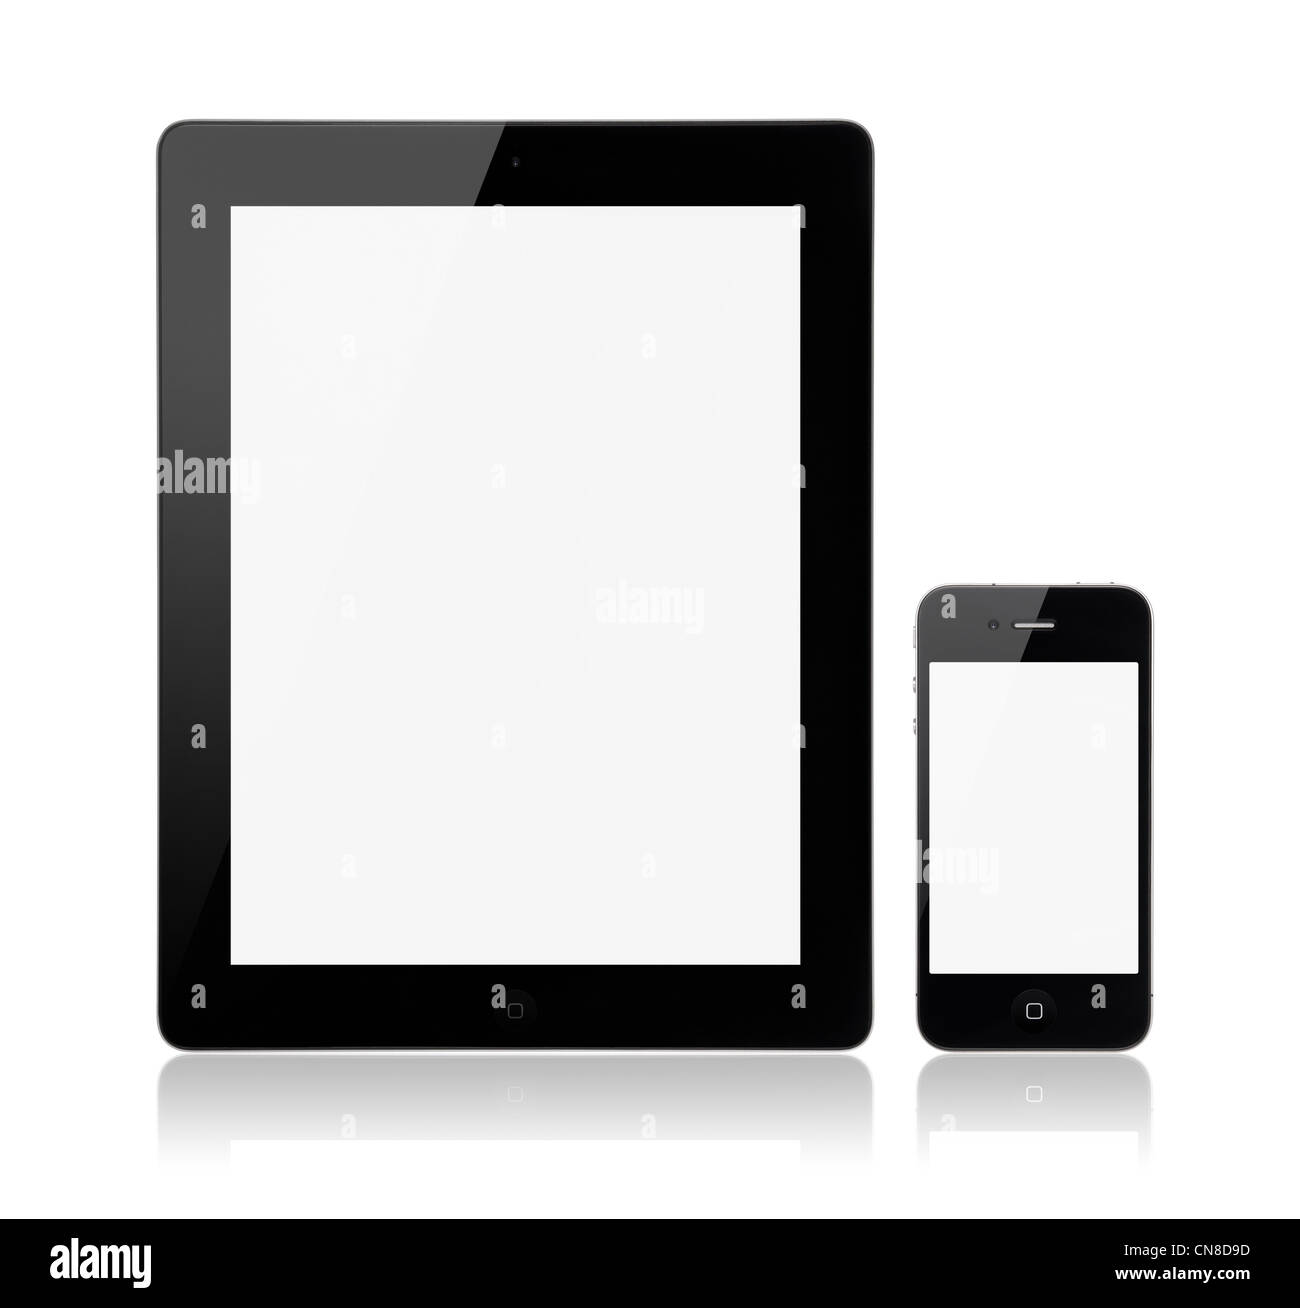 A new Apple iPad 3rd generation with Apple iPhone 4S on a white background with a blank screen. Stock Photo